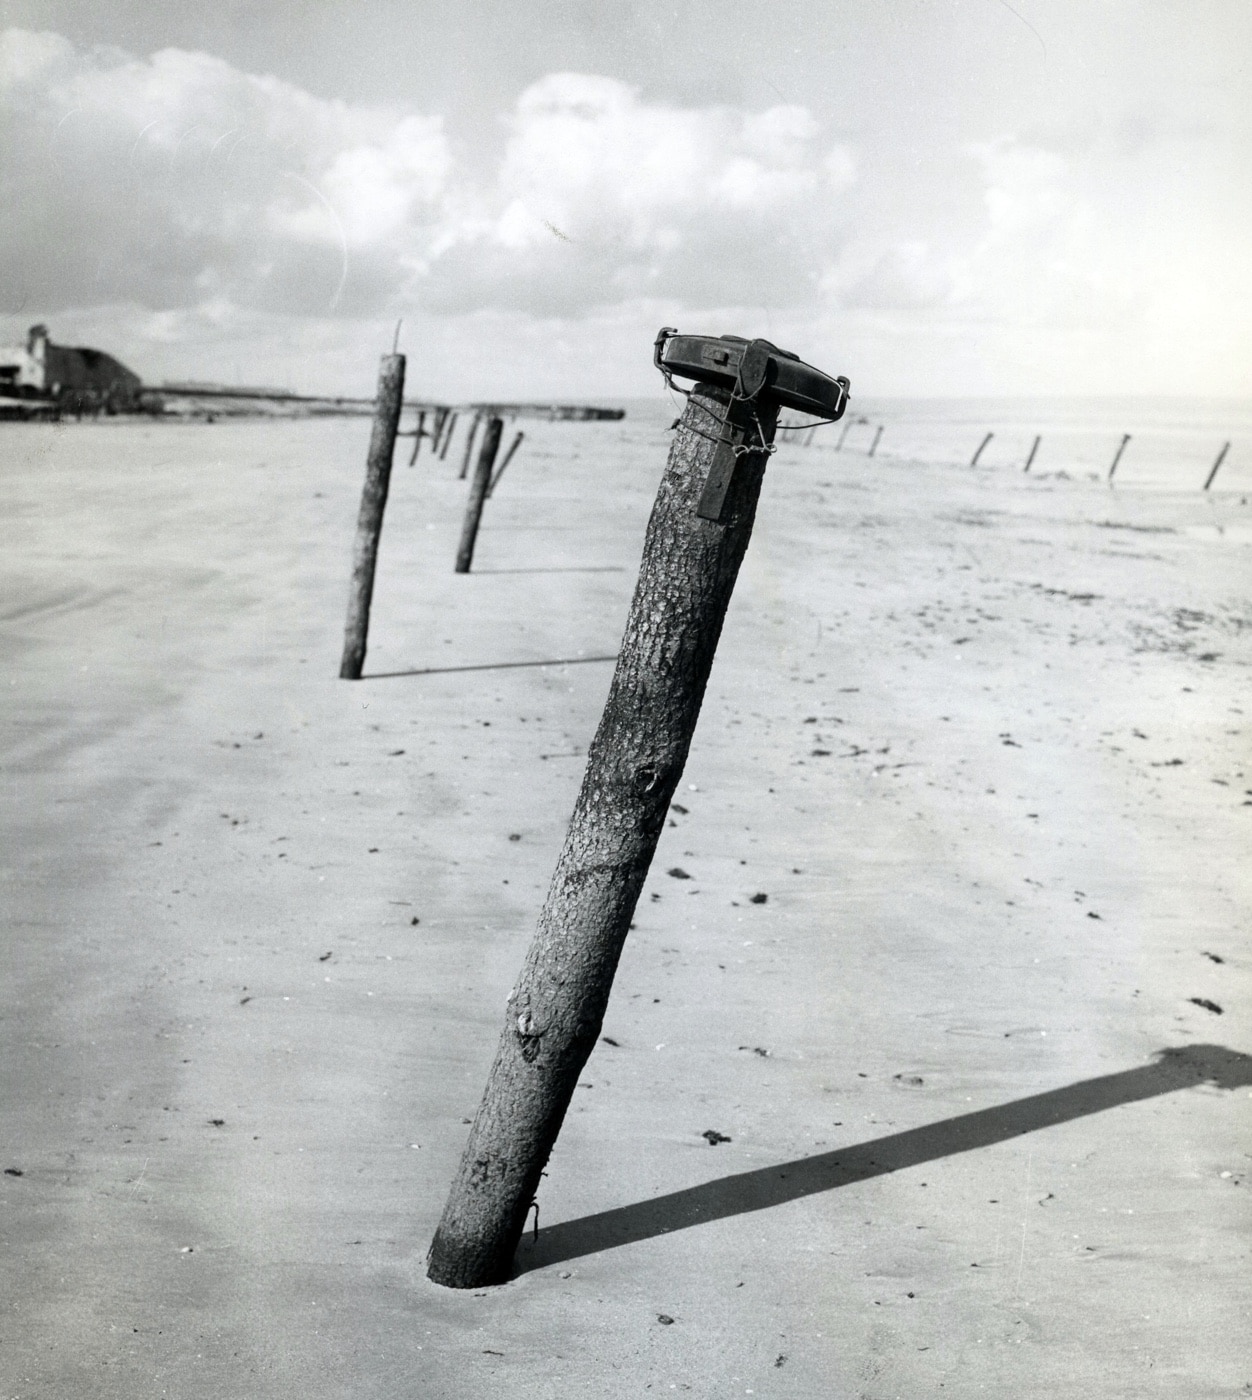 Here we see a Teller Mine attached to a wooden pole on Utah Beach. The mines were generally called Teller Mines while the German names were model specific such as Tellermine 42 or Tellermine 43.